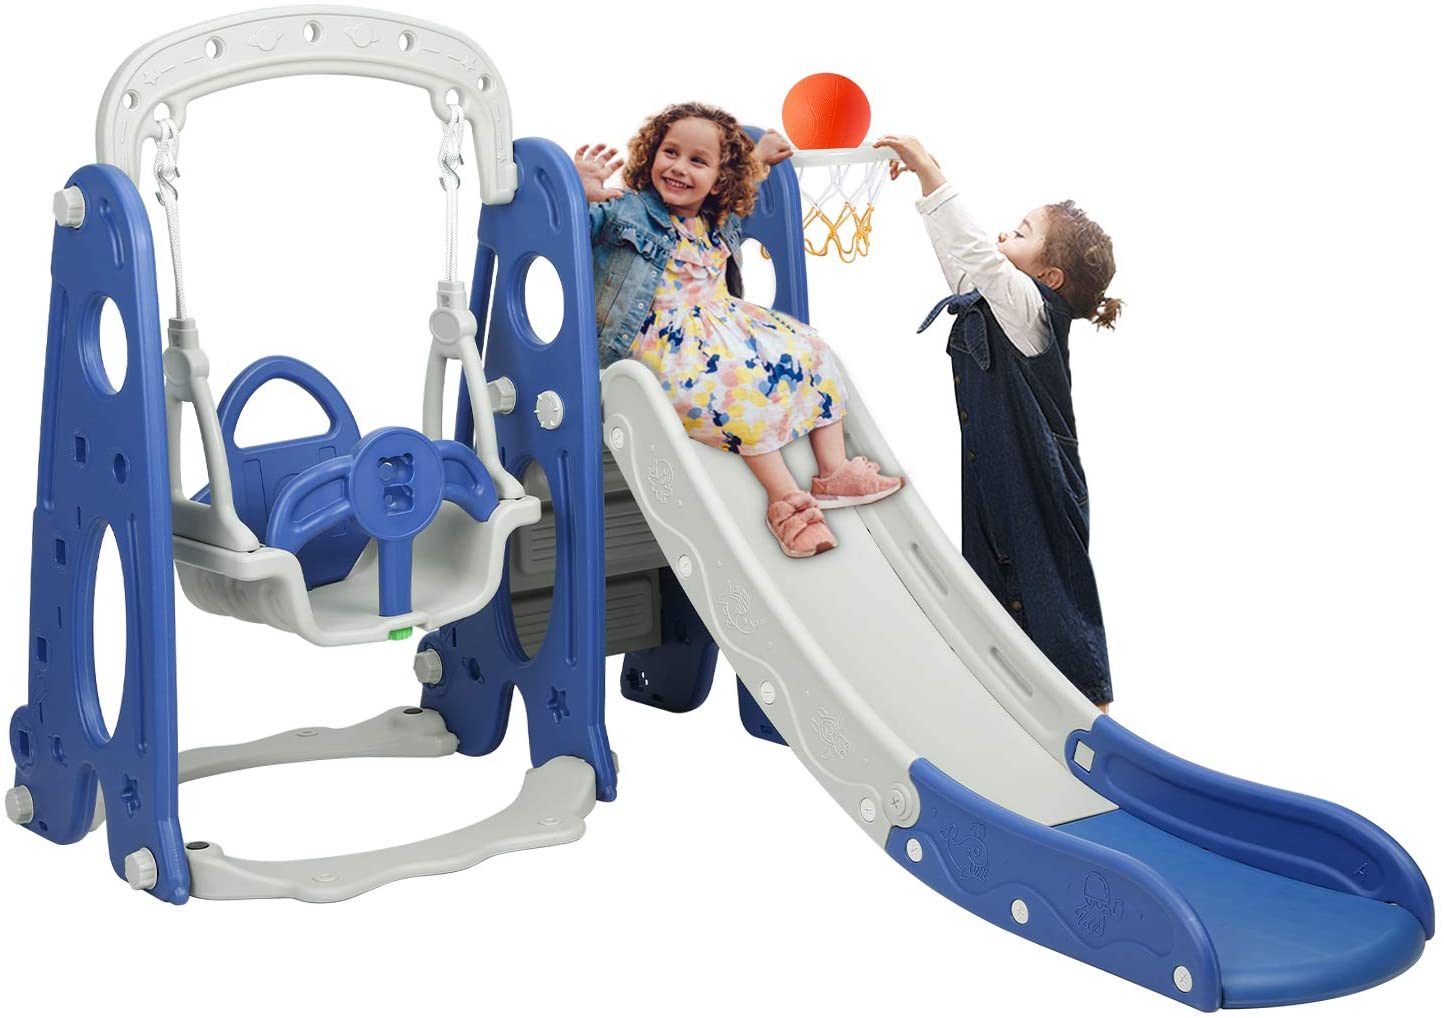 BAHOM 3 in 1 Climber Slides Playset